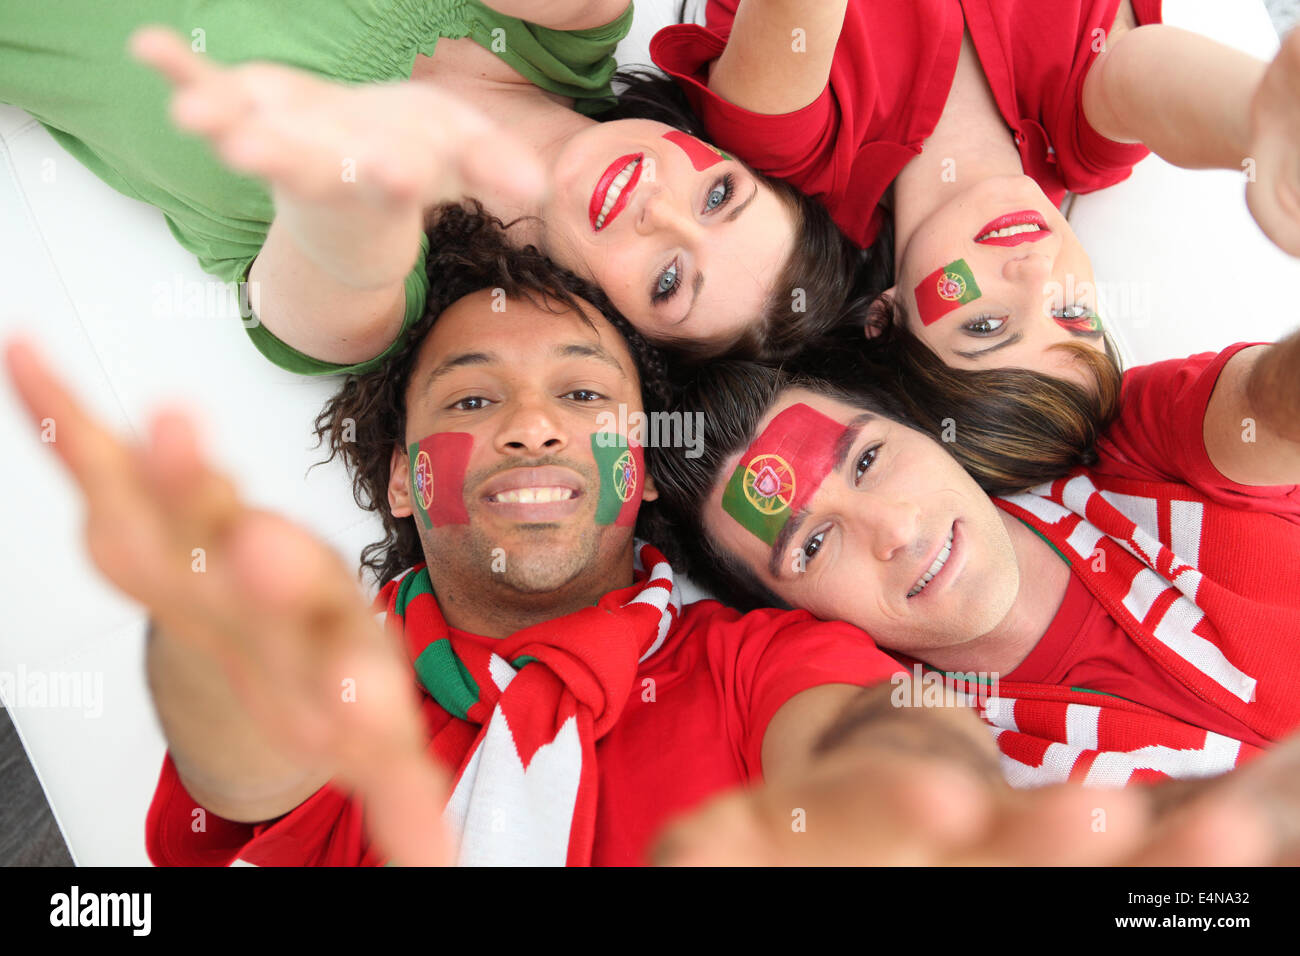 Portuguese football fans reaching out Stock Photo